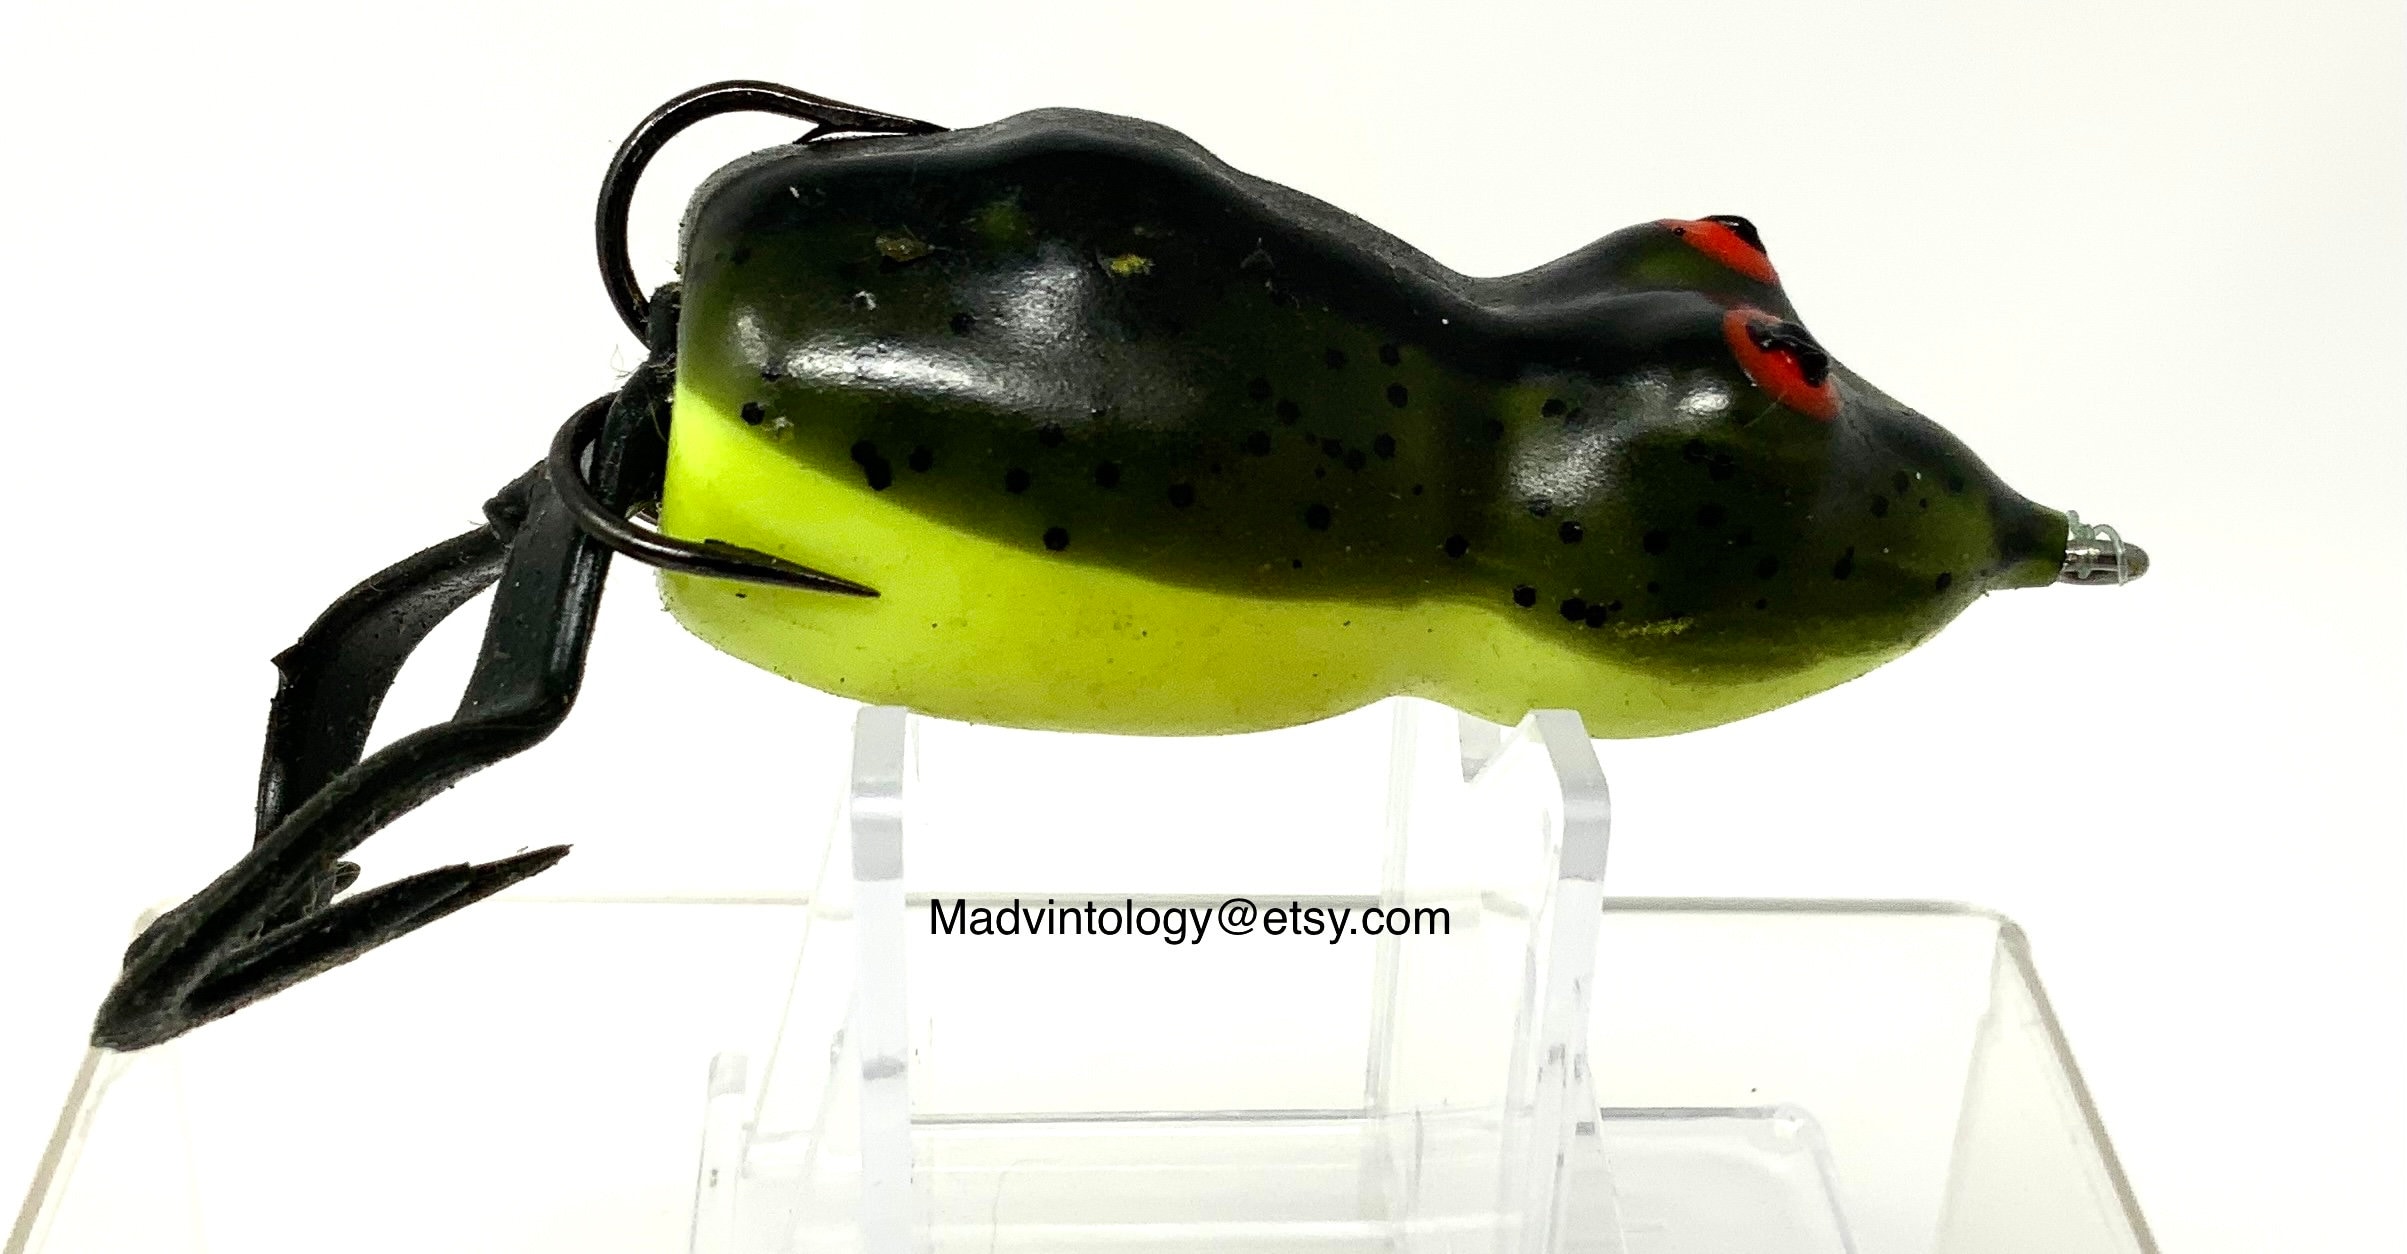 Vintage Fishing Lure Bait Crankbait Rubber Silicon Soft Body Frog Wit Red  Eyes Topwater -  Israel